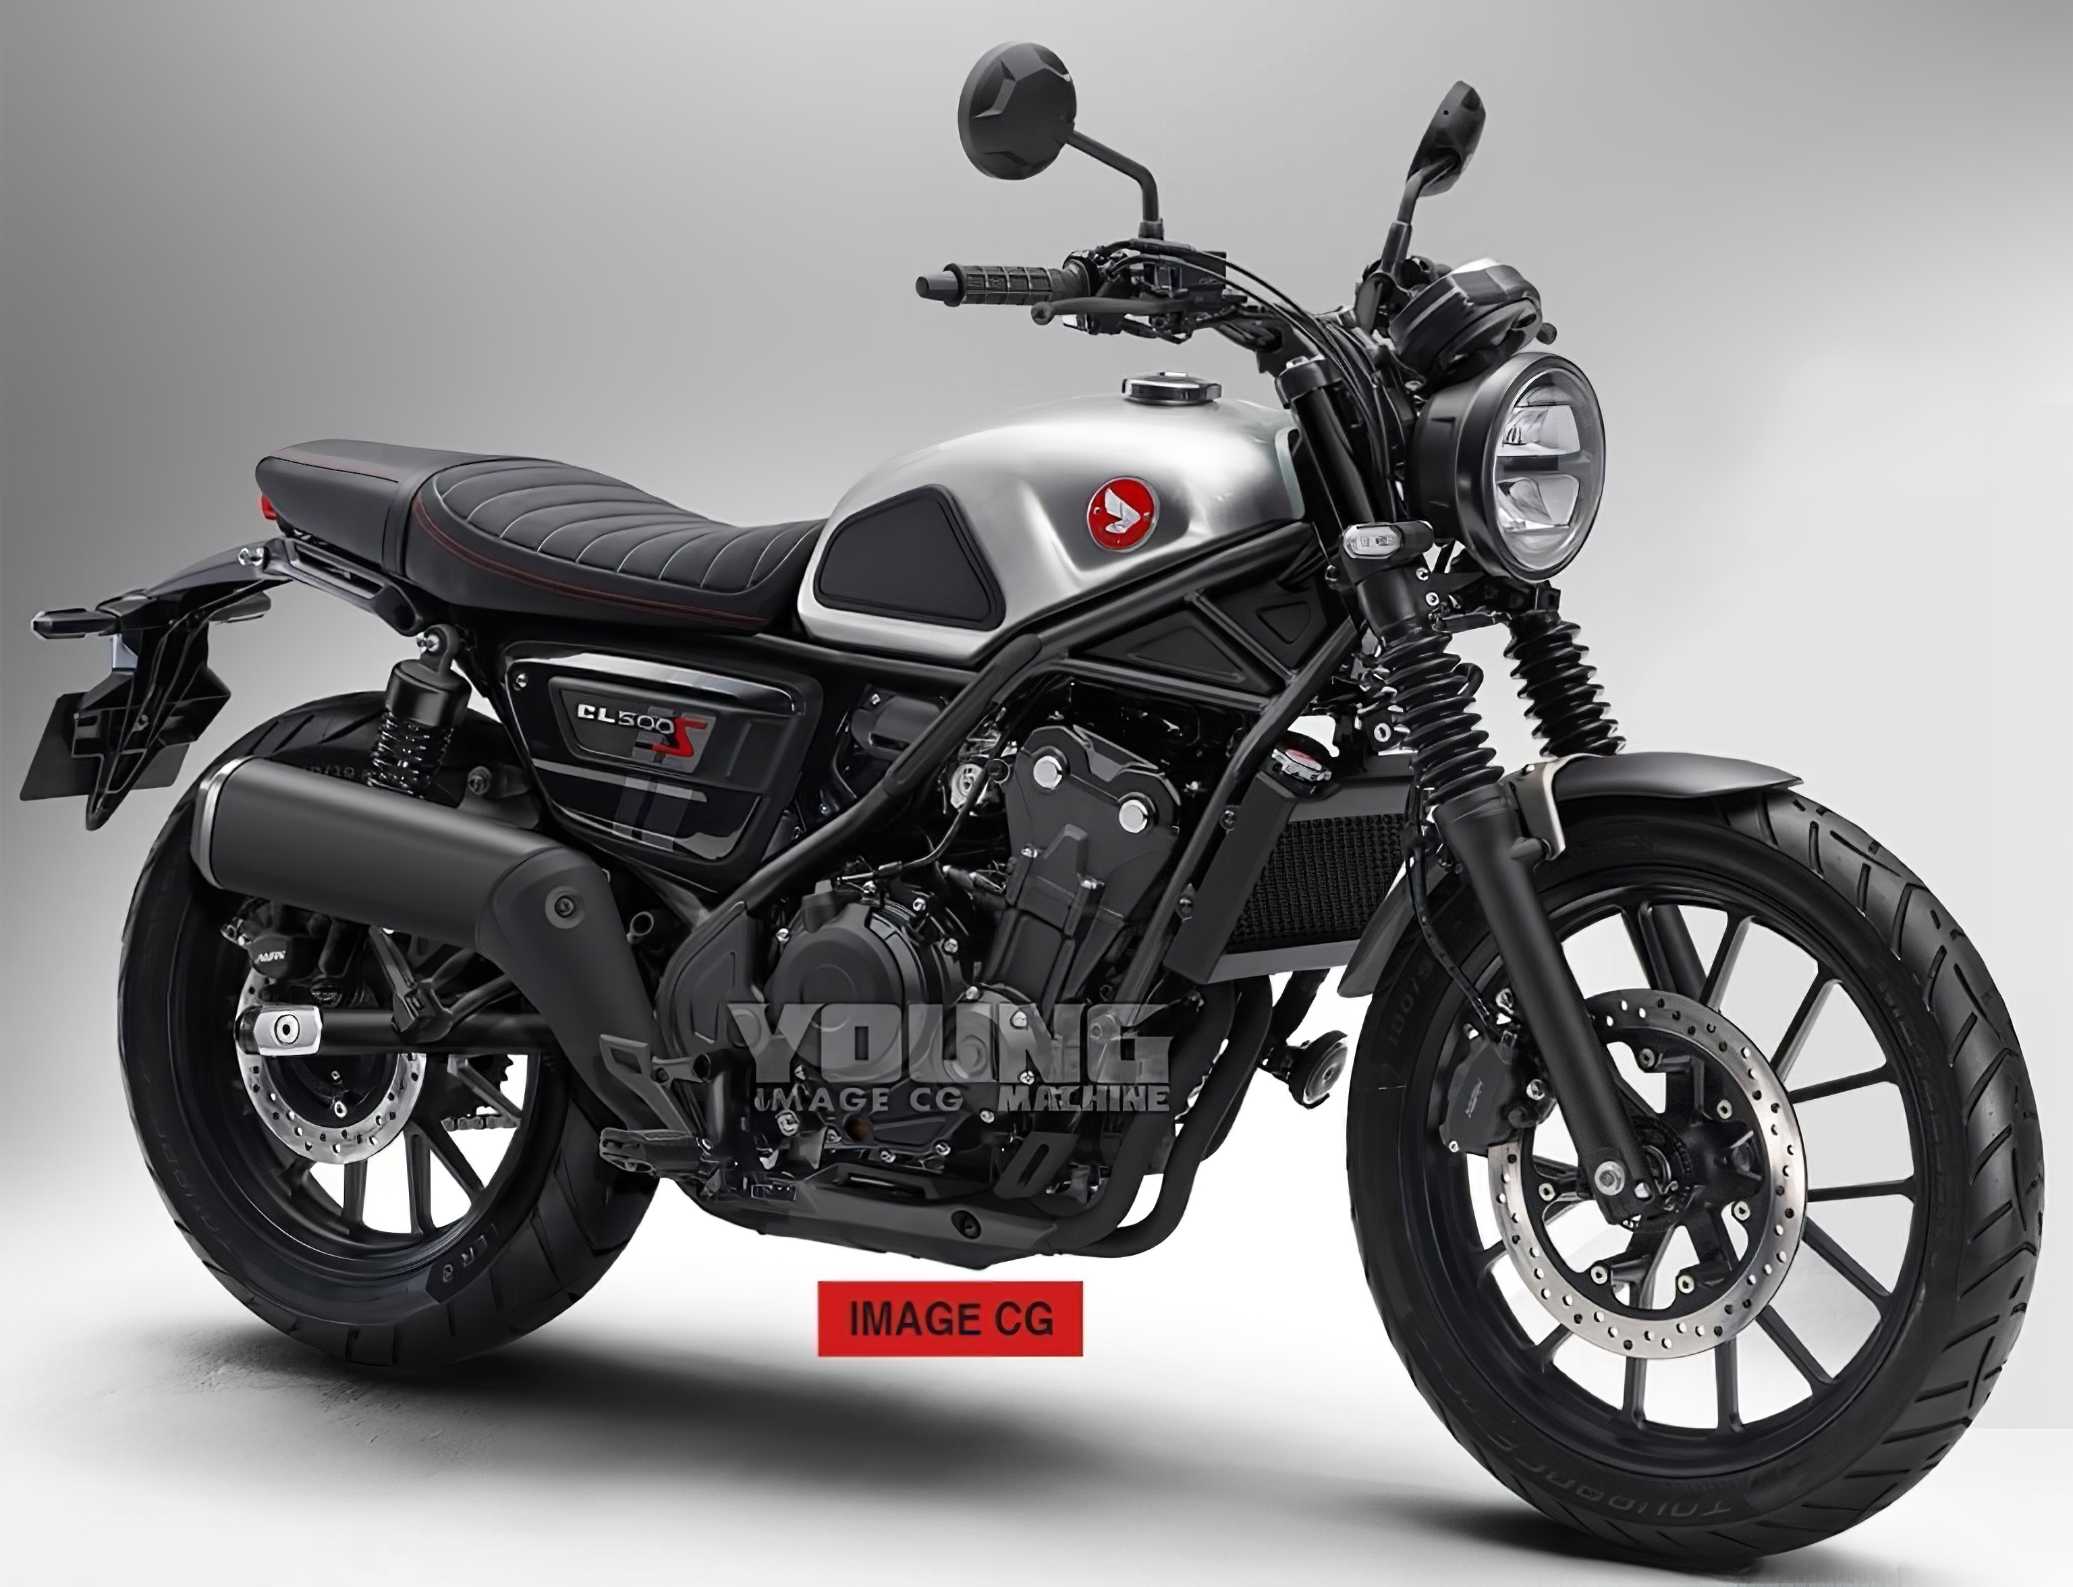 Is a new Honda CL500 Scrambler on the way? Motorcycles.News